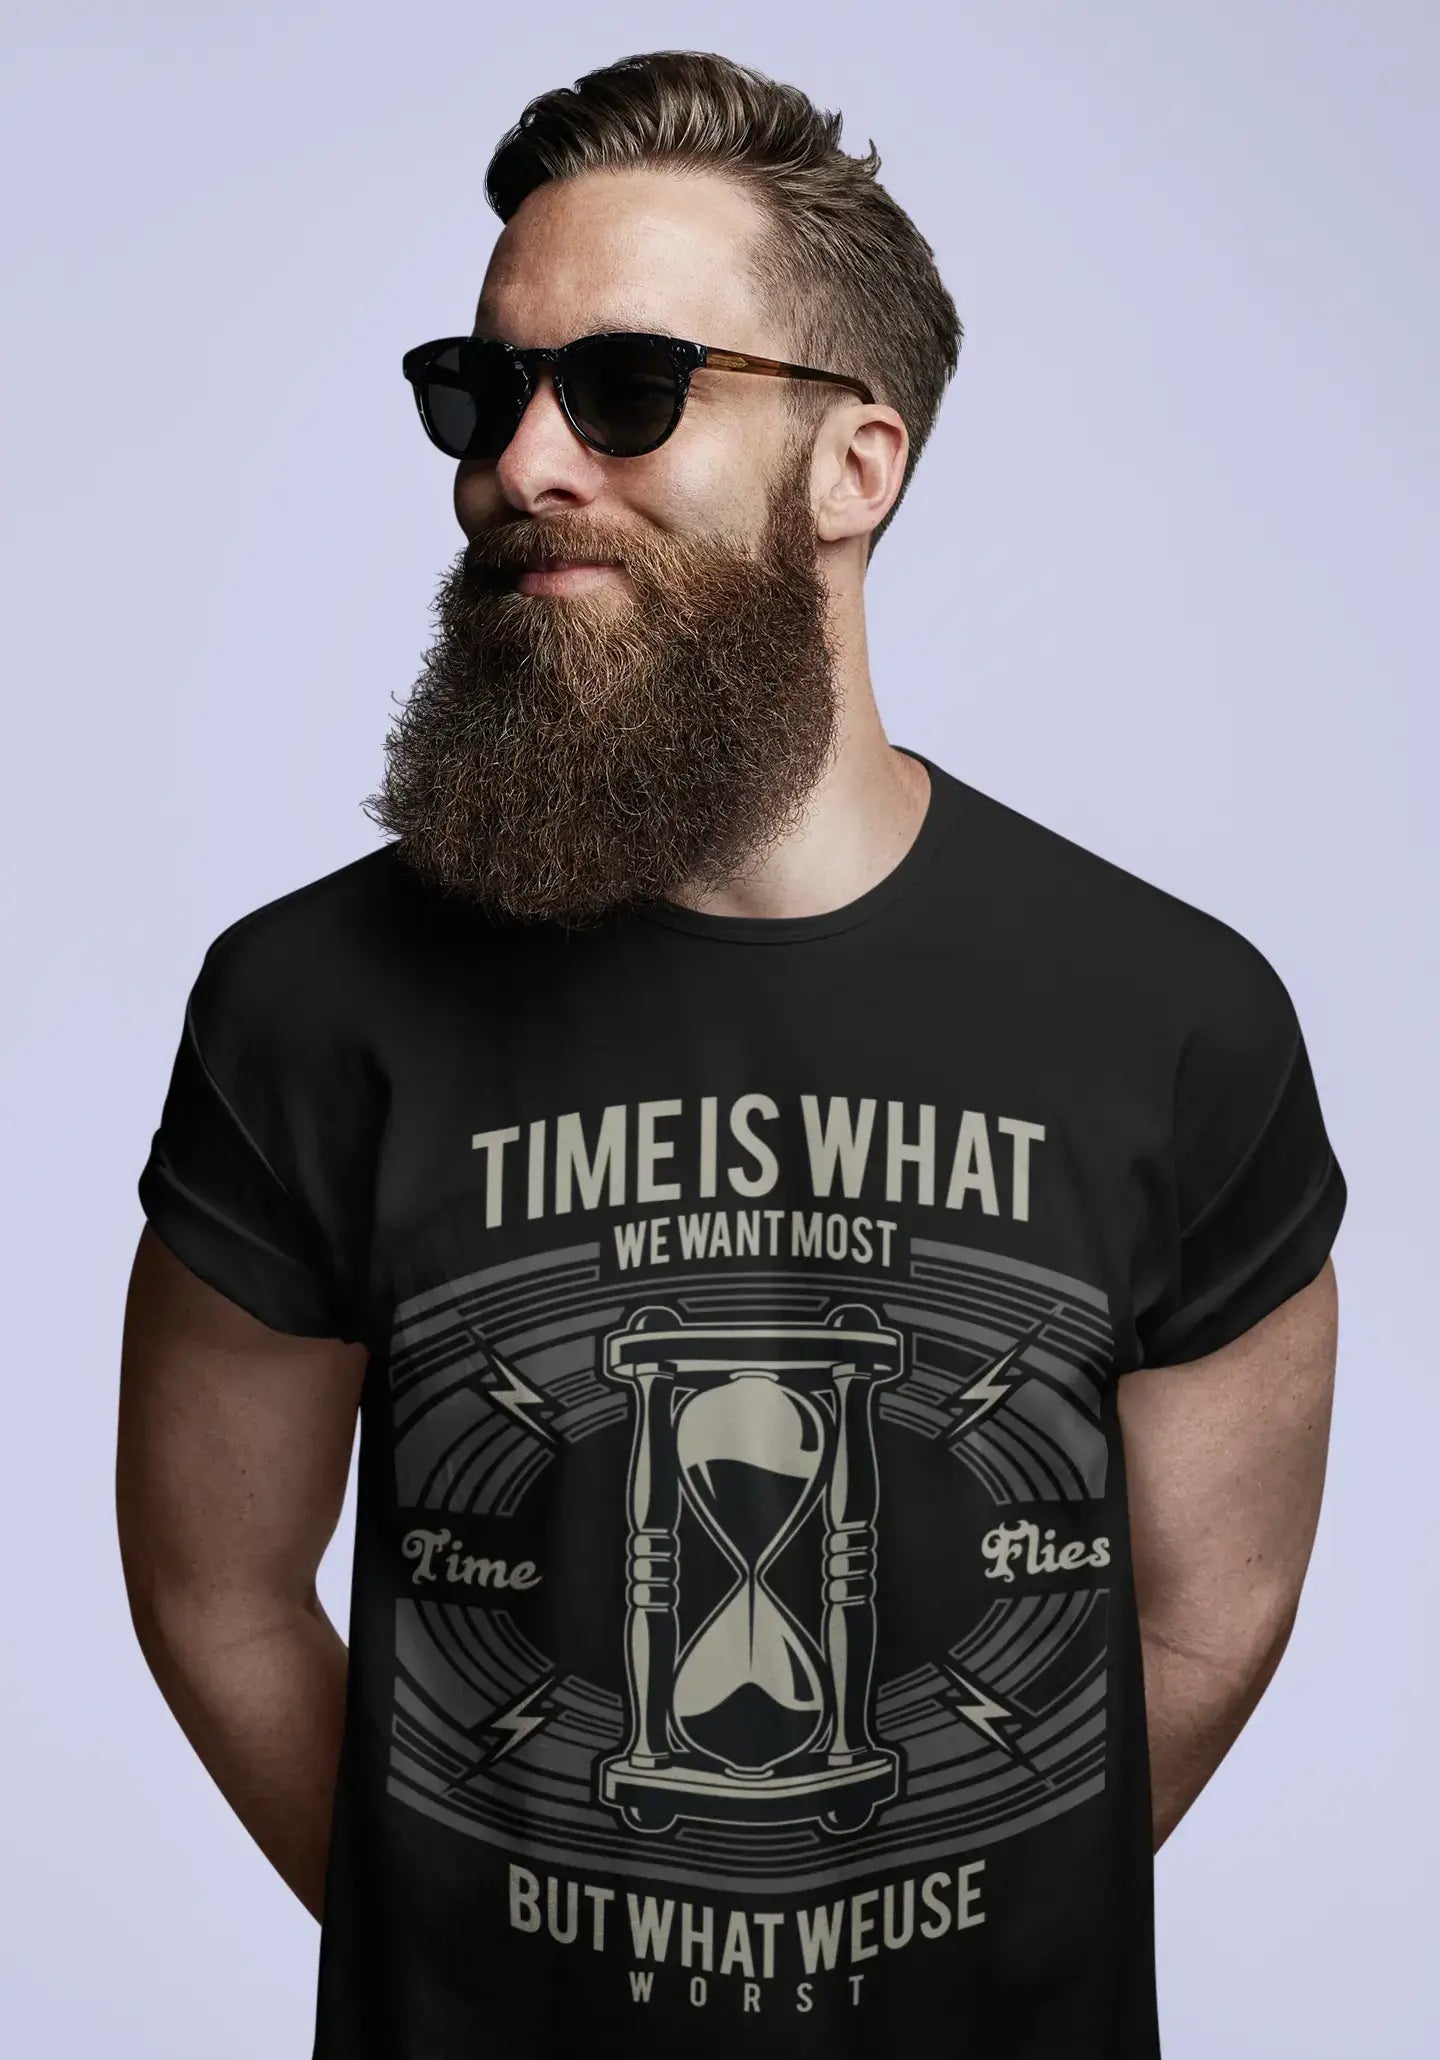 ULTRABASIC Men's Graphic T-Shirt Time Is What We Want - Most Time Flies